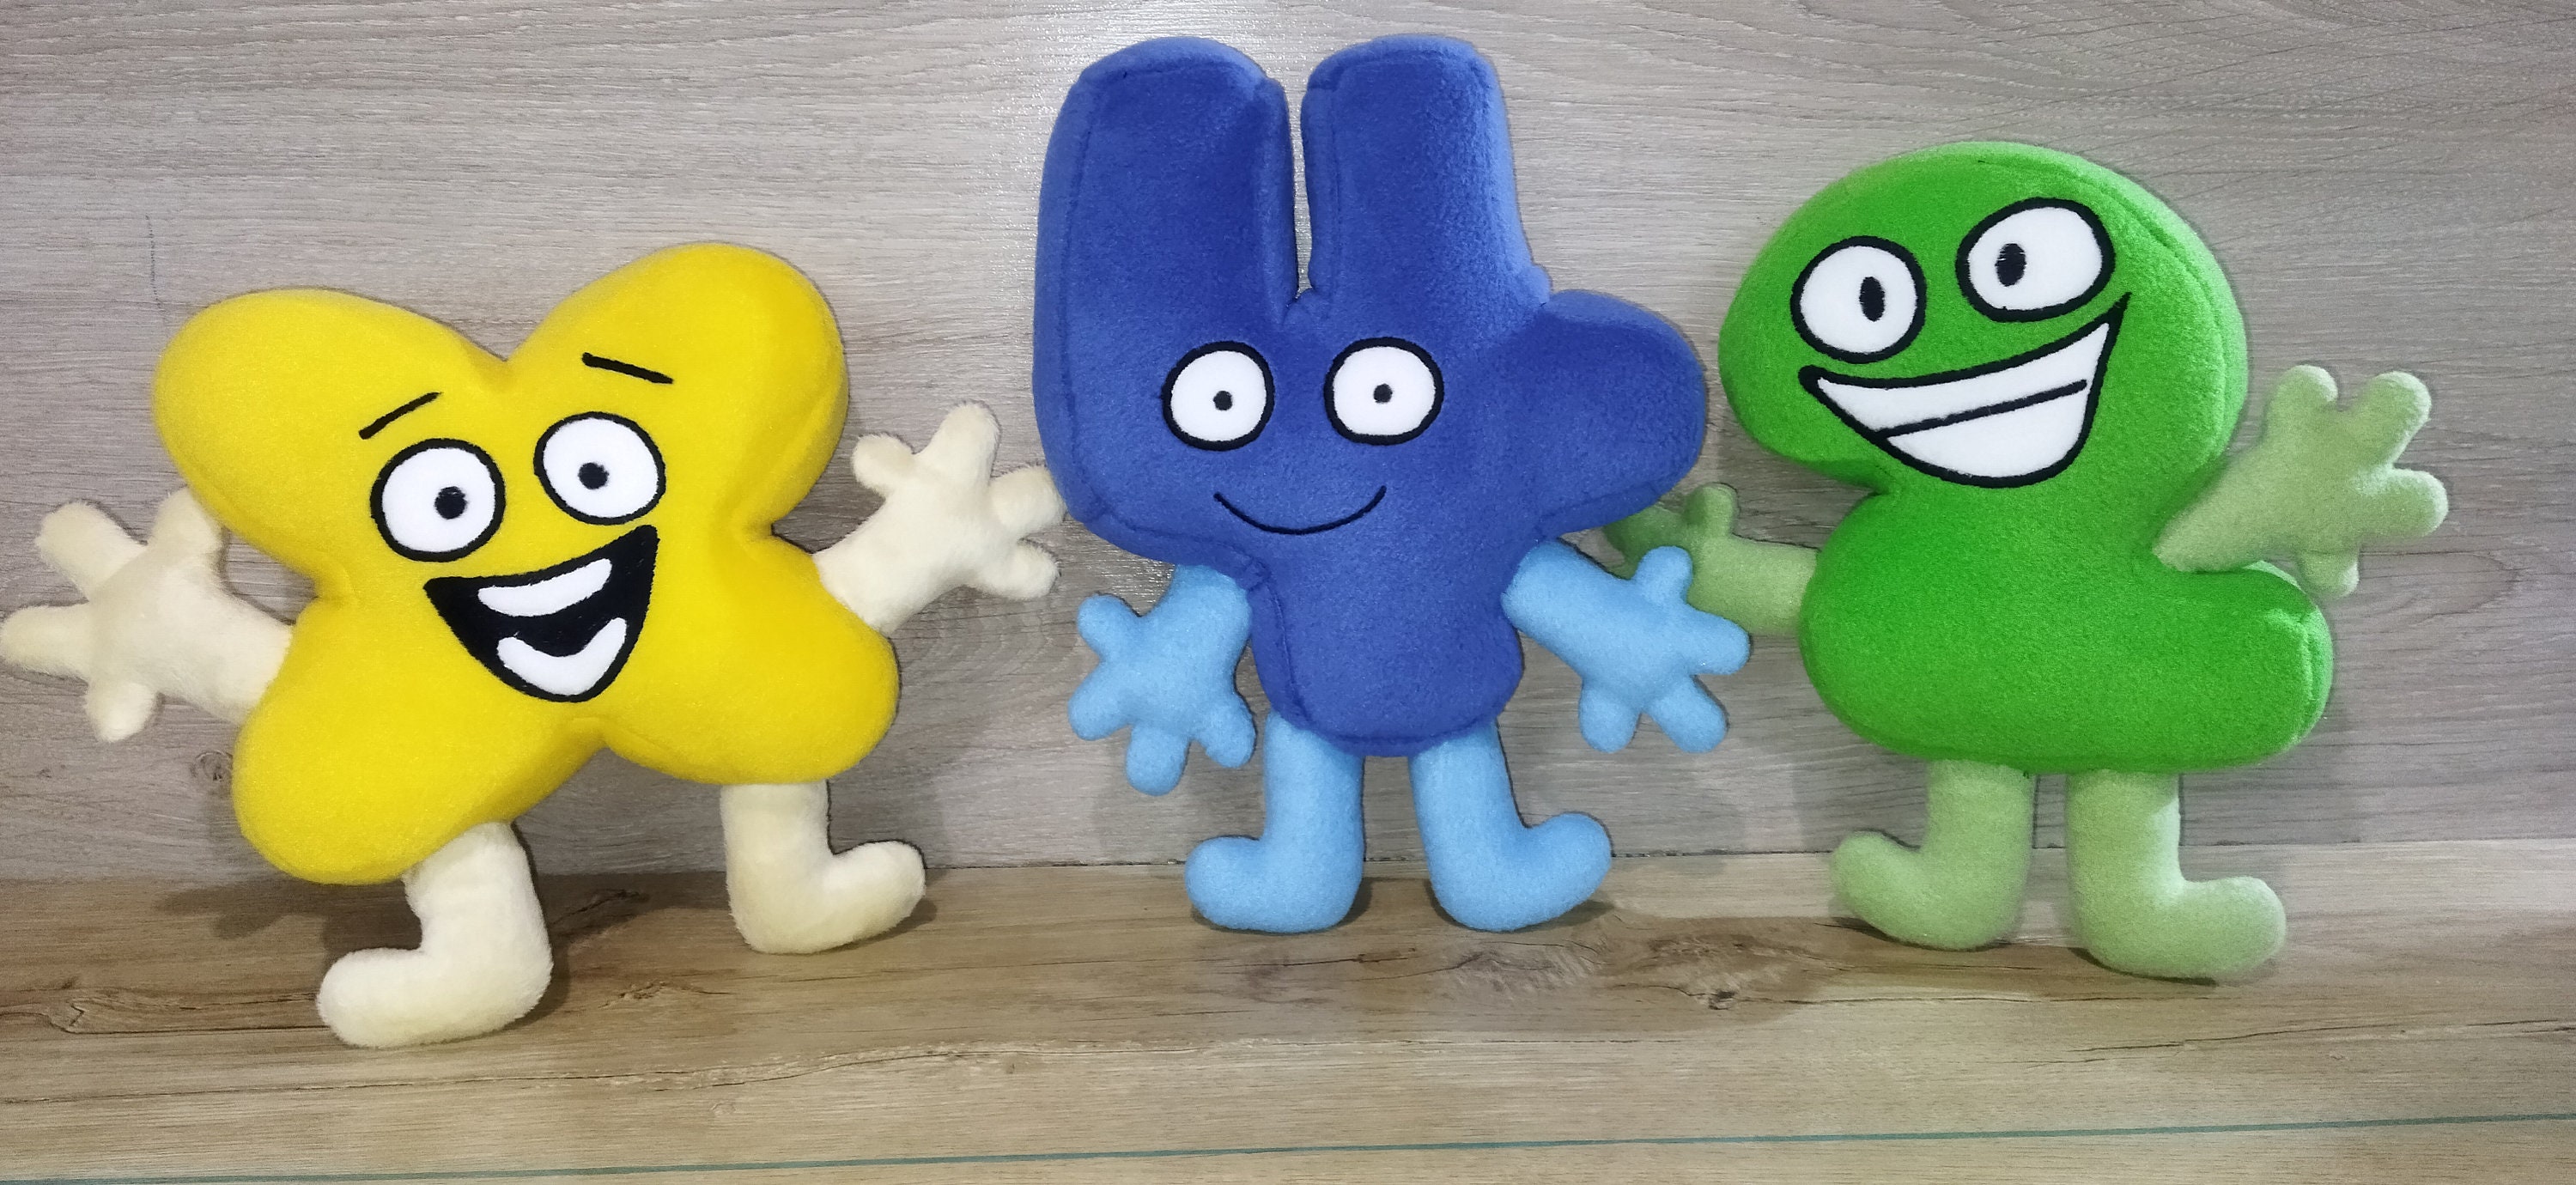 BFDI Four X And Two Plush But Robot Chicken Style By, 41% OFF